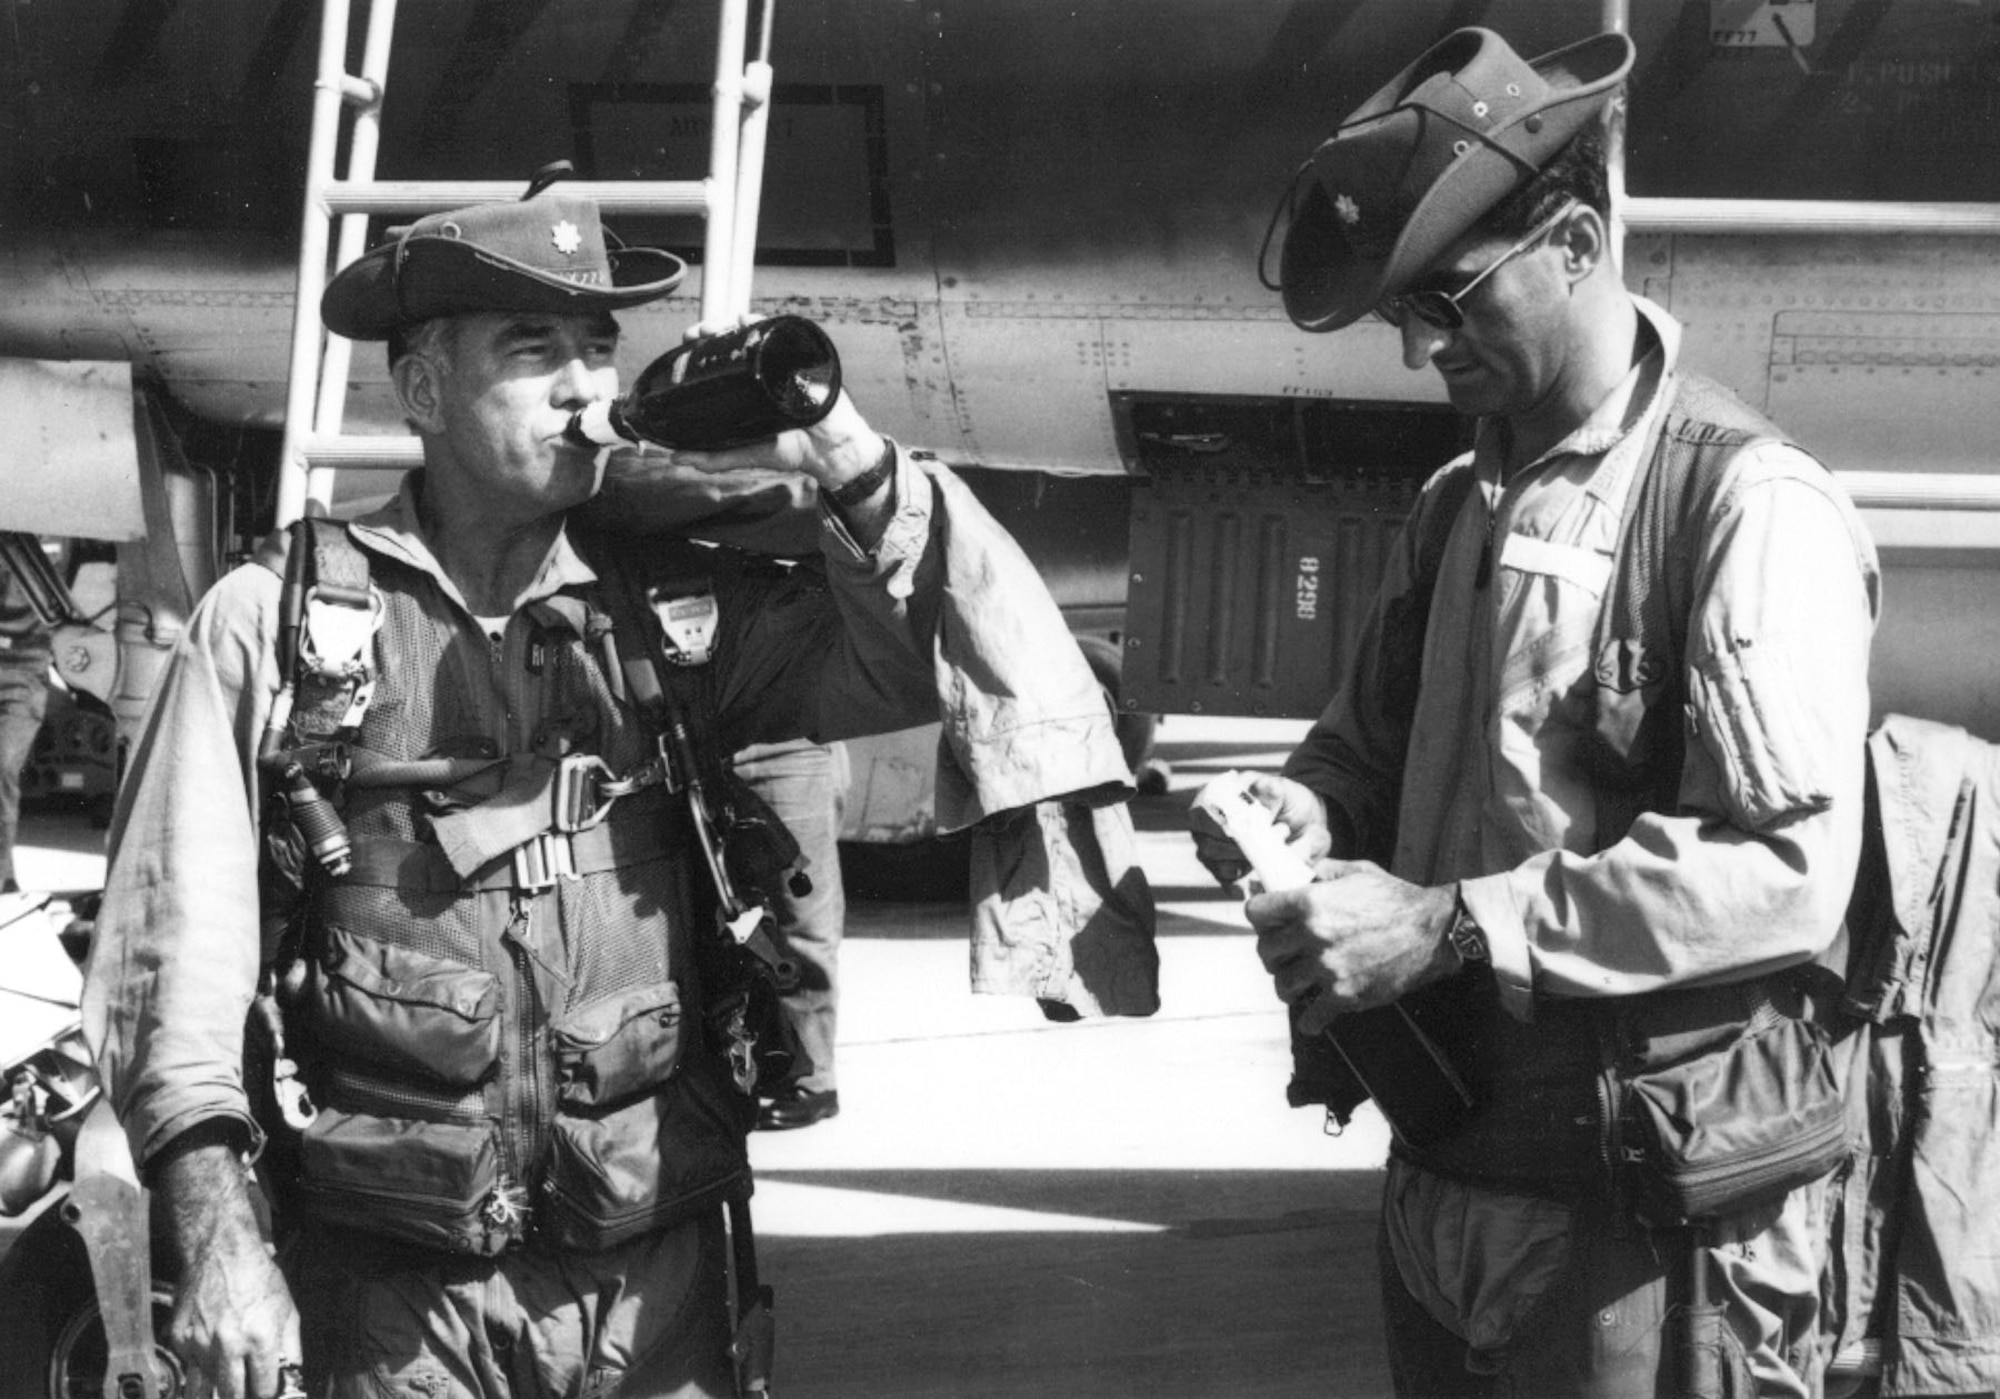 Maj. William Robinson, pilot (l), and Maj. Peter Tsouprake, EWO (r), celebrate their 100th mission. Earlier, on July 5, 1966, they flew lead on a large strike mission north of Hanoi. Disregarding their own safety, they braved intense ground fire and several SAMs to attack four SA-2 sites. Three were knocked out and the fourth was heavily damaged. For their valor, they were both awarded the Air Force Cross. (U.S. Air Force photo)